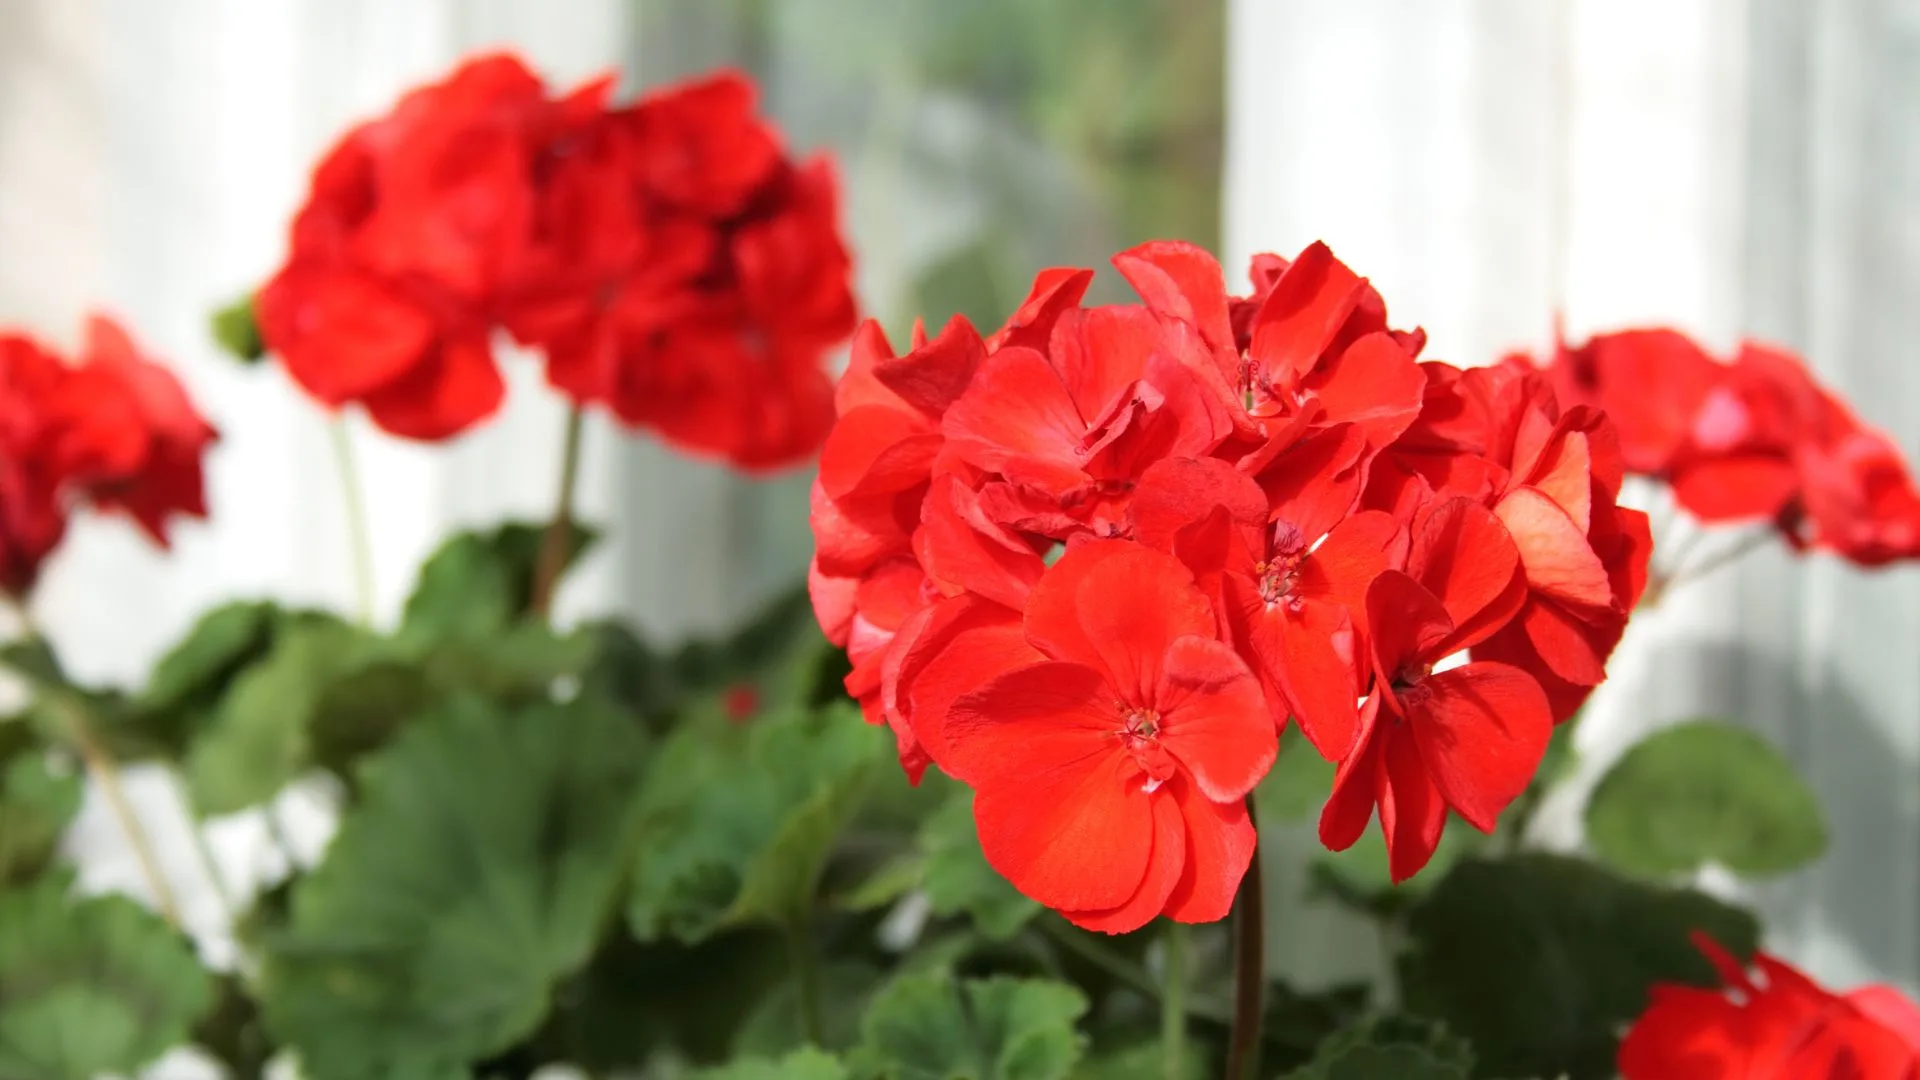 These 5 Simple Methods Will Keep Your Geraniums Blooming All Season Long